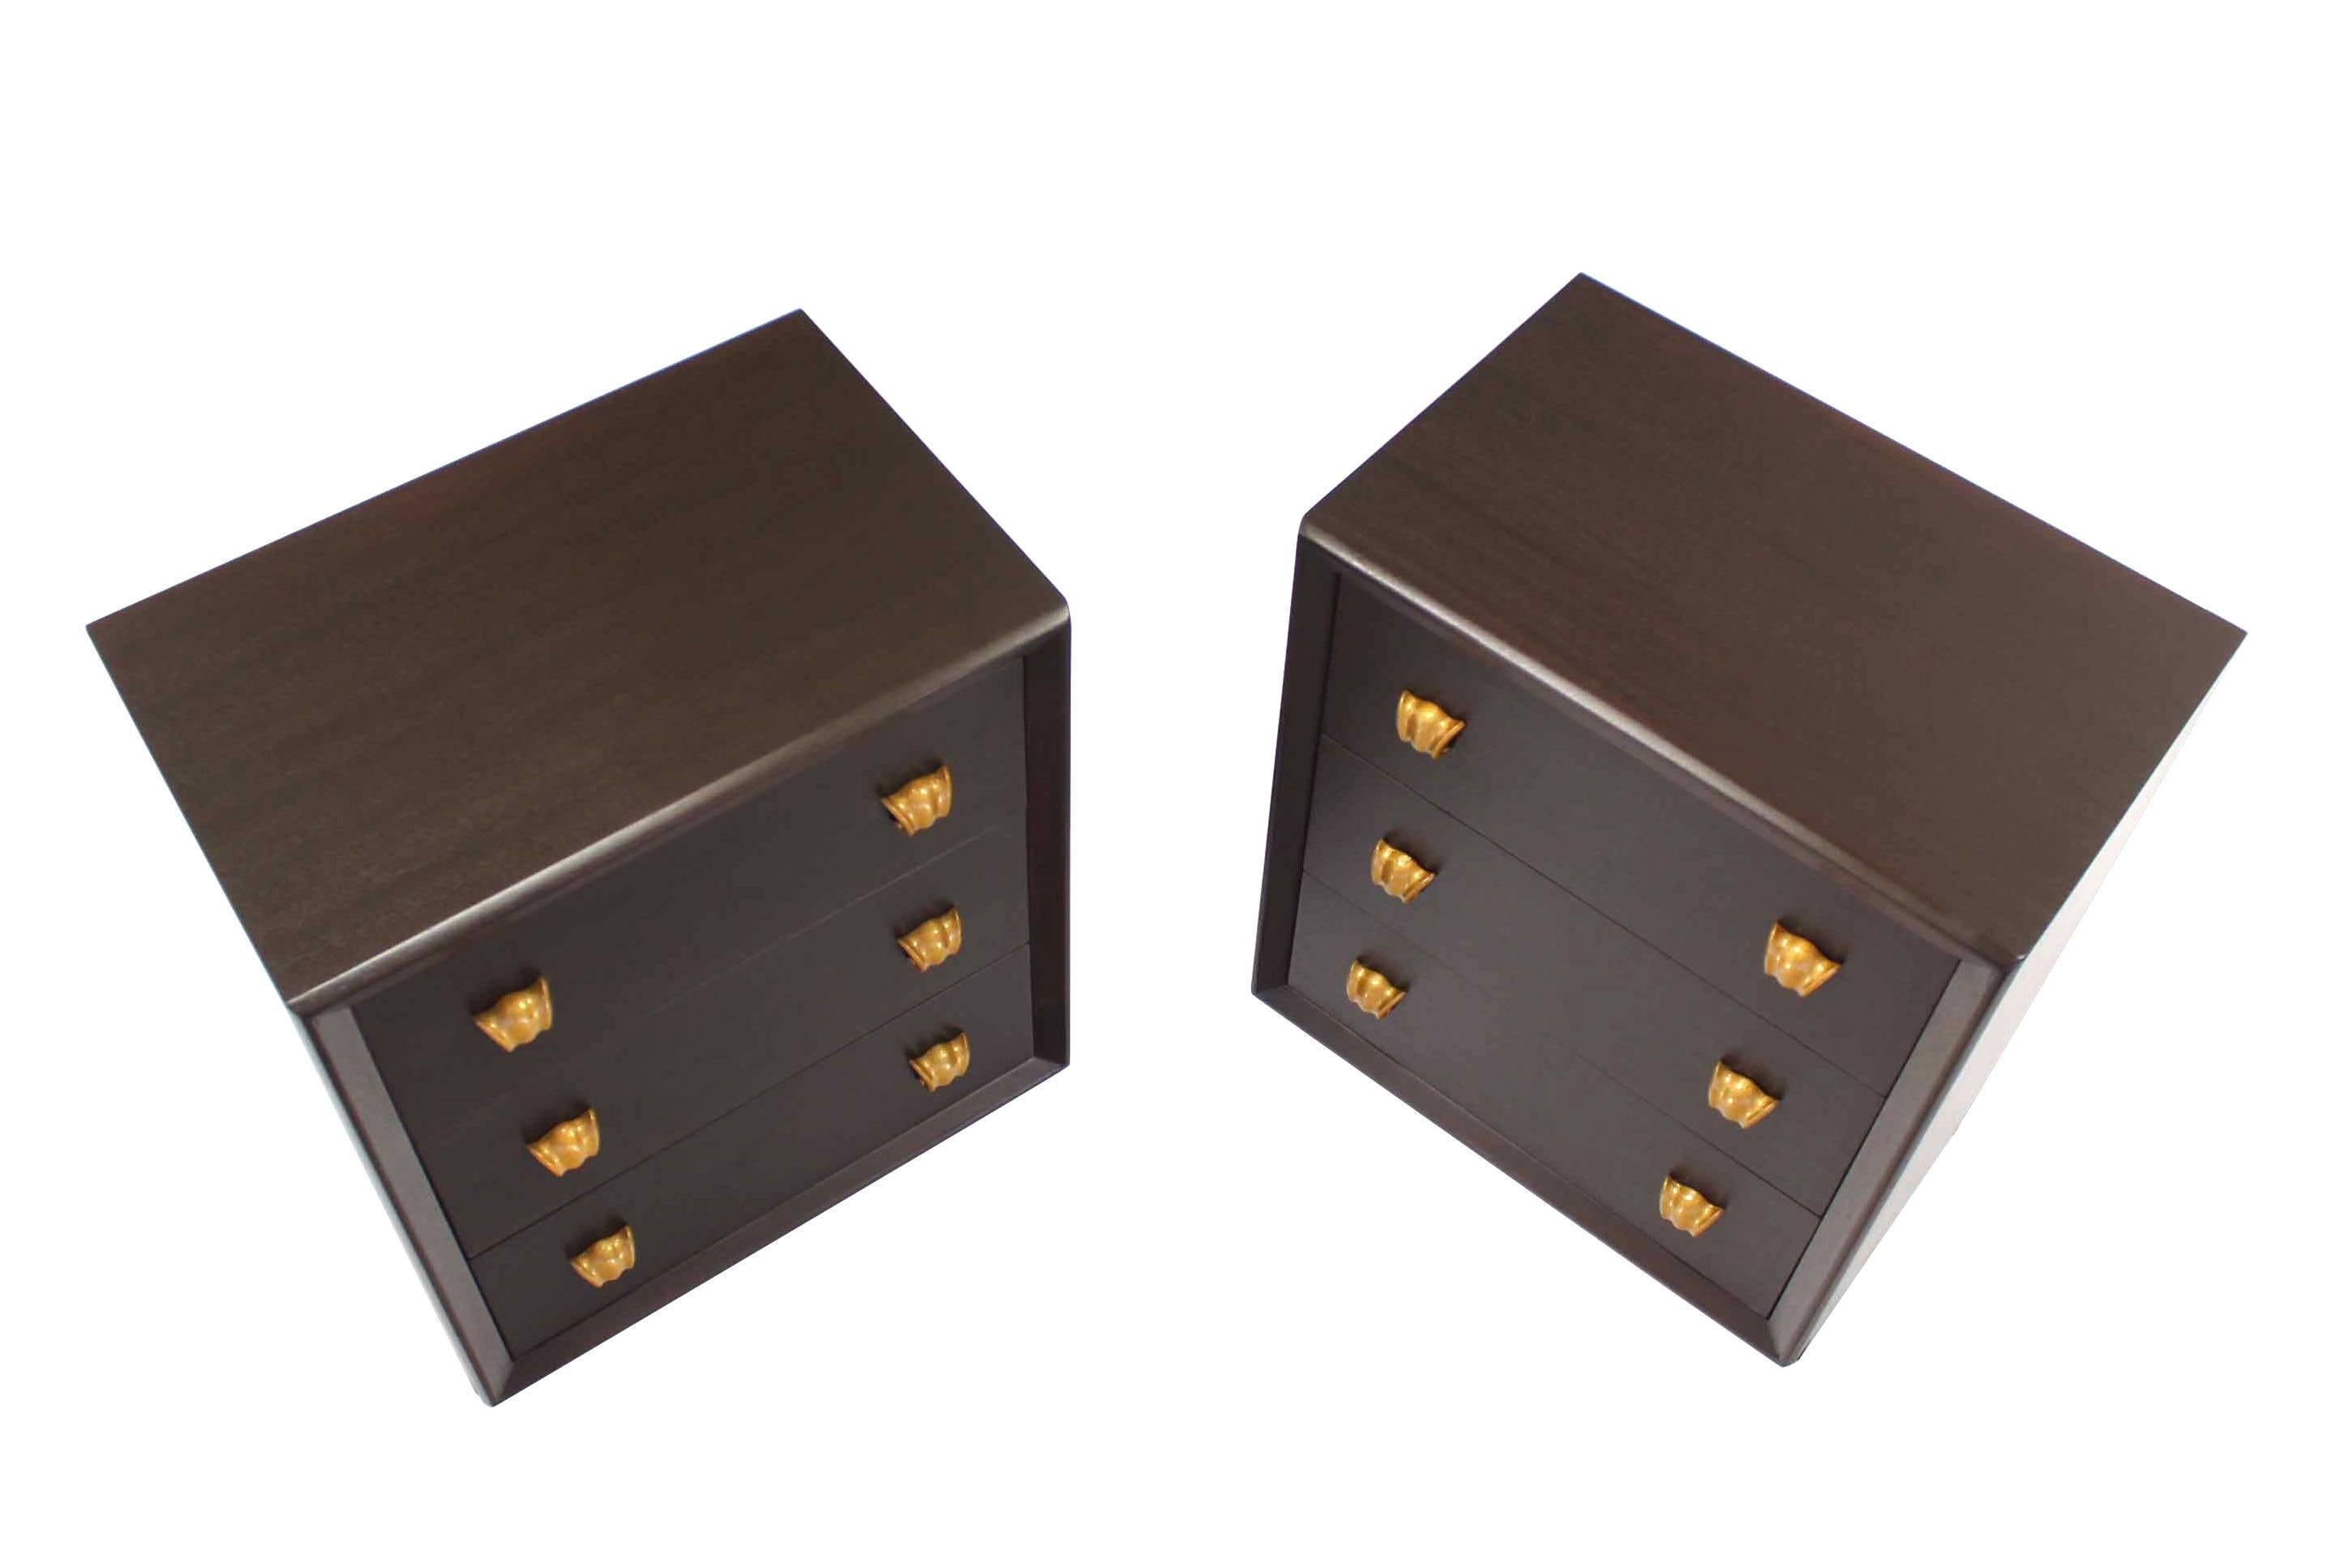 Pair of very nice mid-century modern bachelor chests.